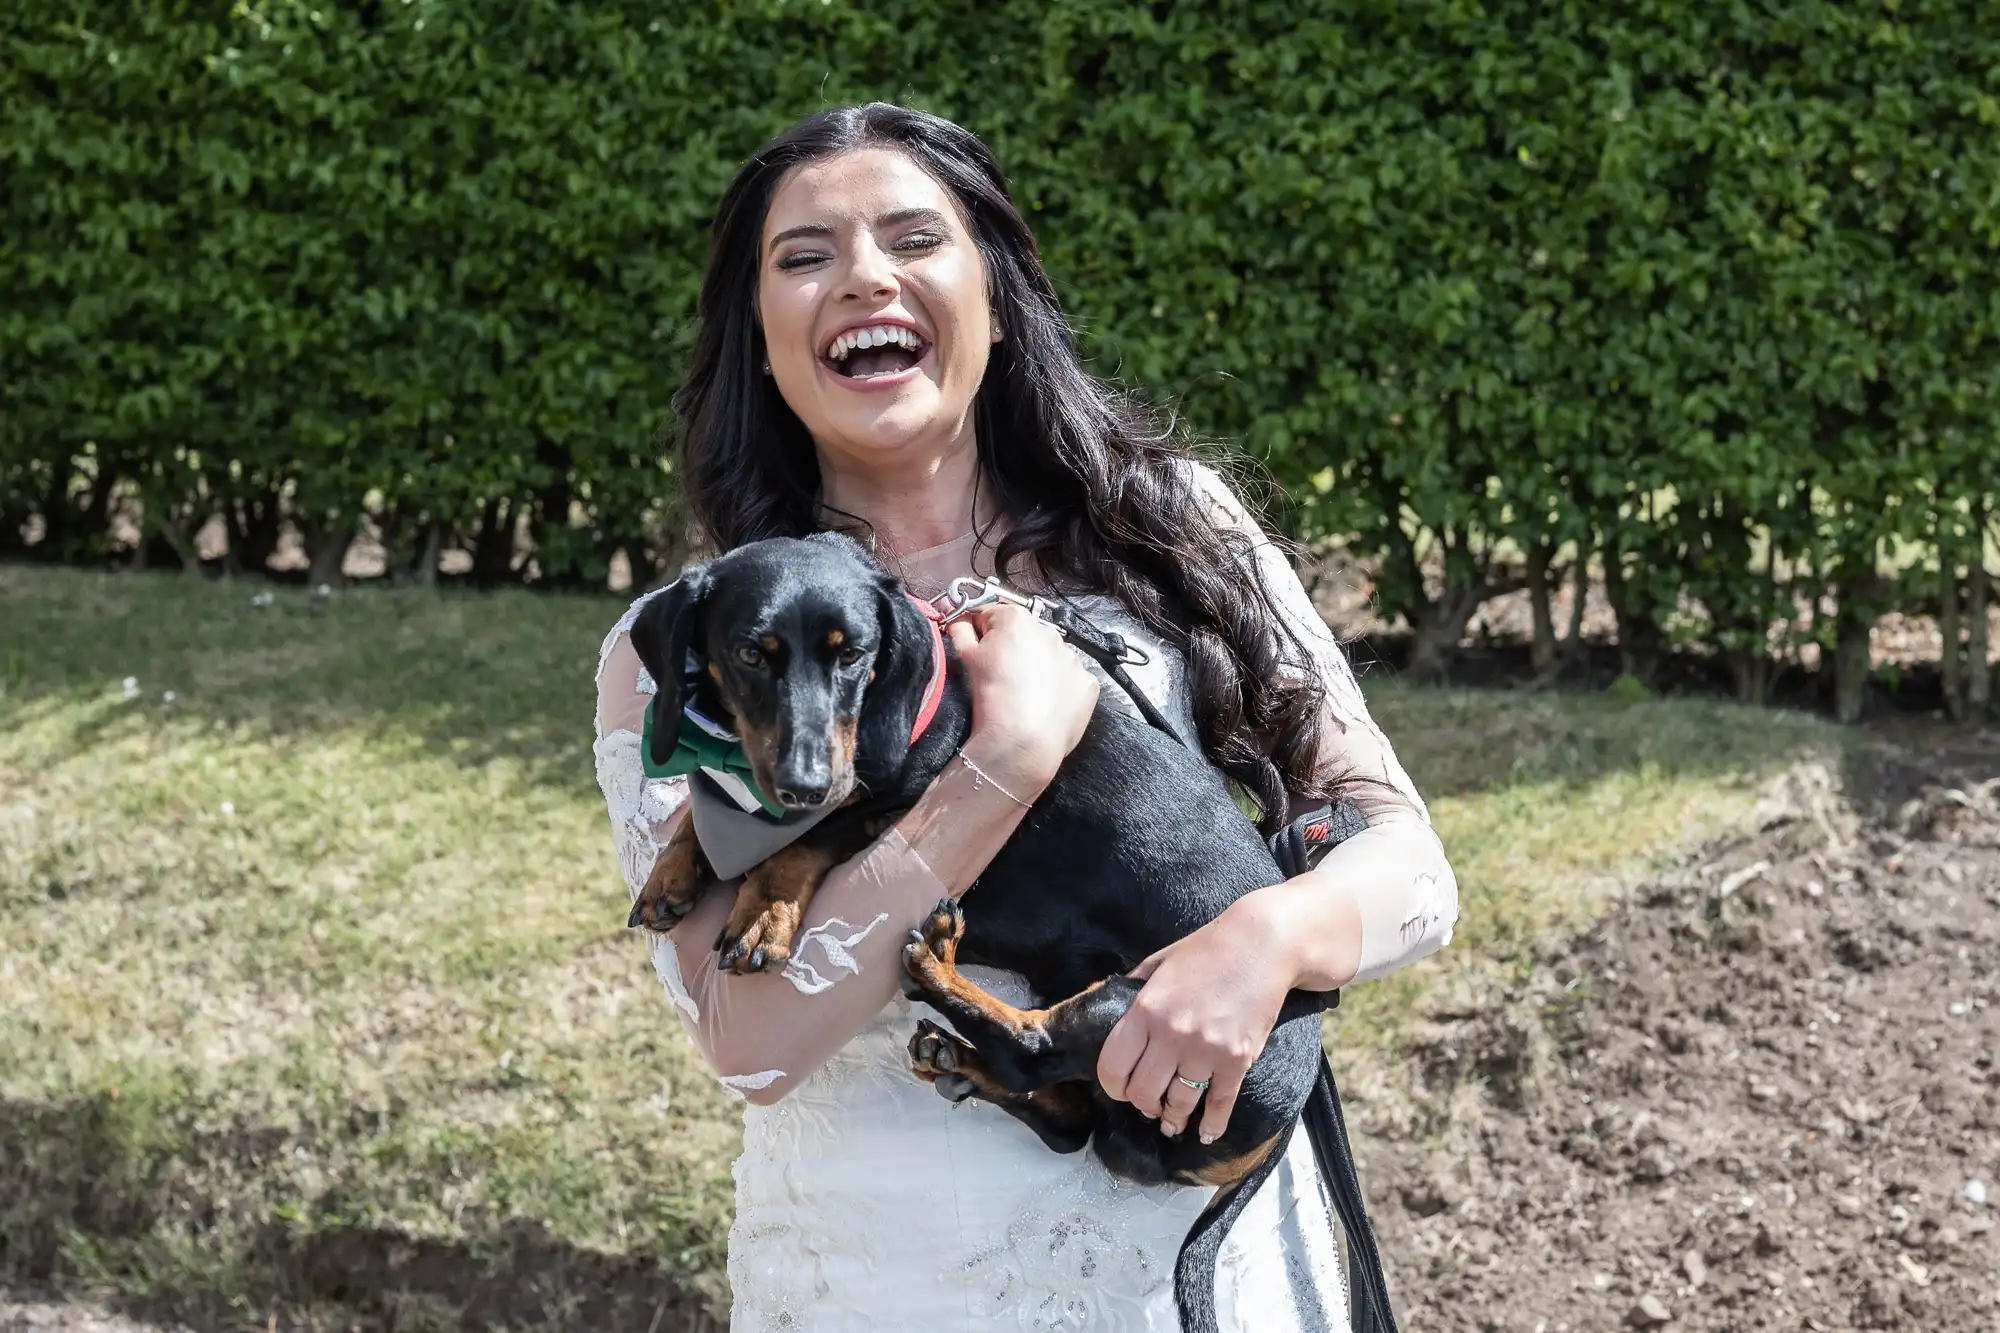 Woman in a white dress laughing joyfully while holding a black dachshund in a sunny garden setting.